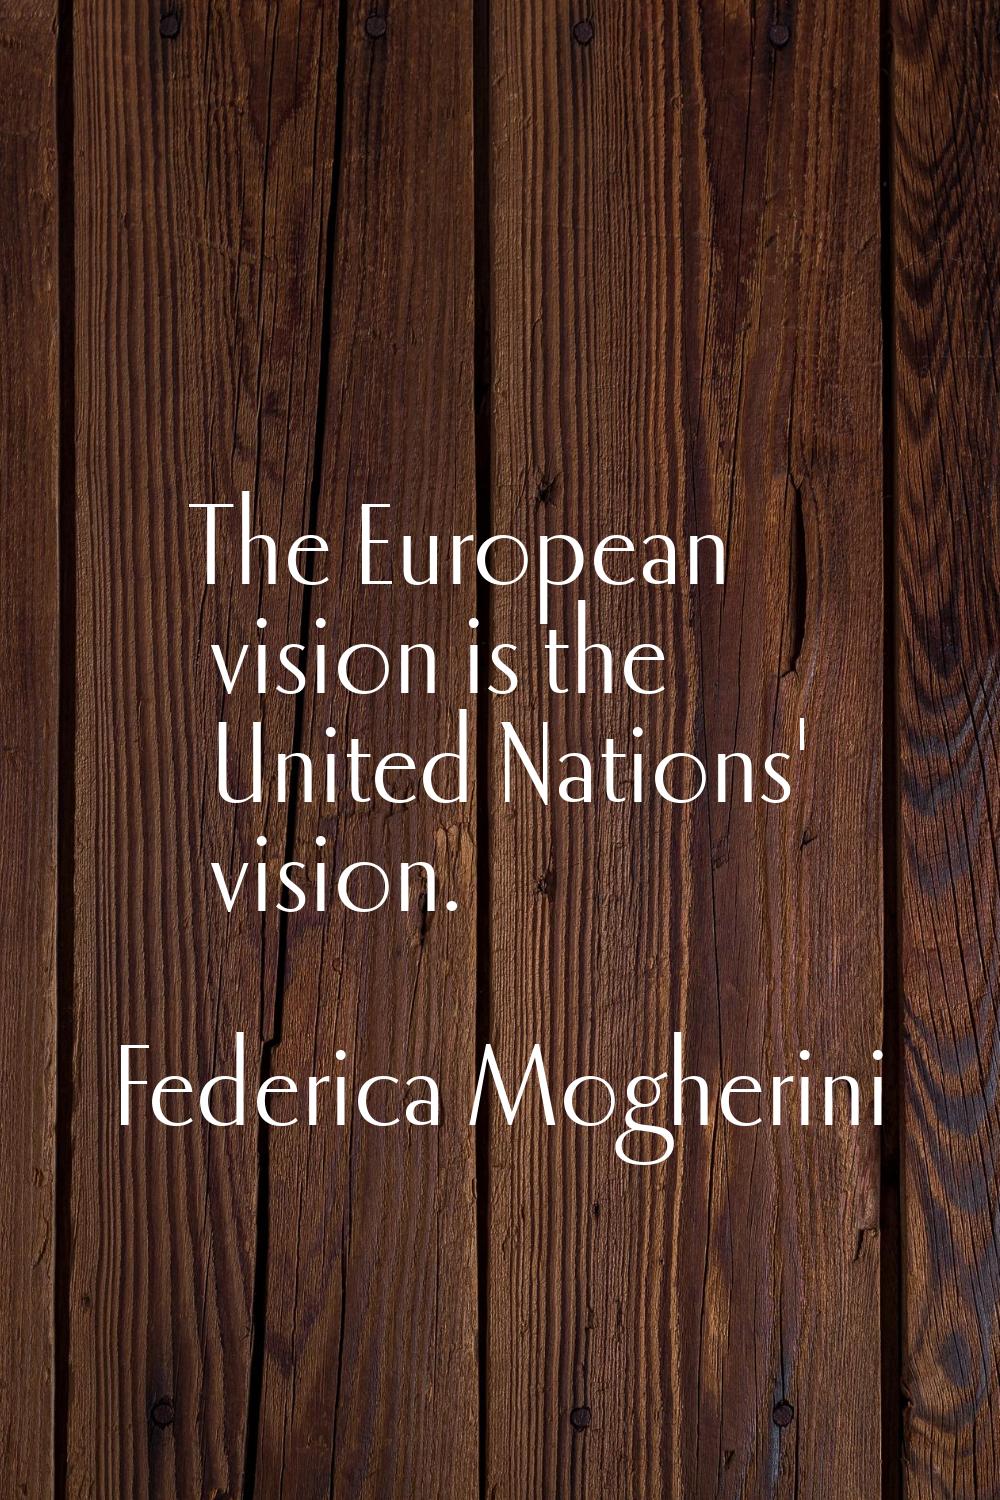 The European vision is the United Nations' vision.